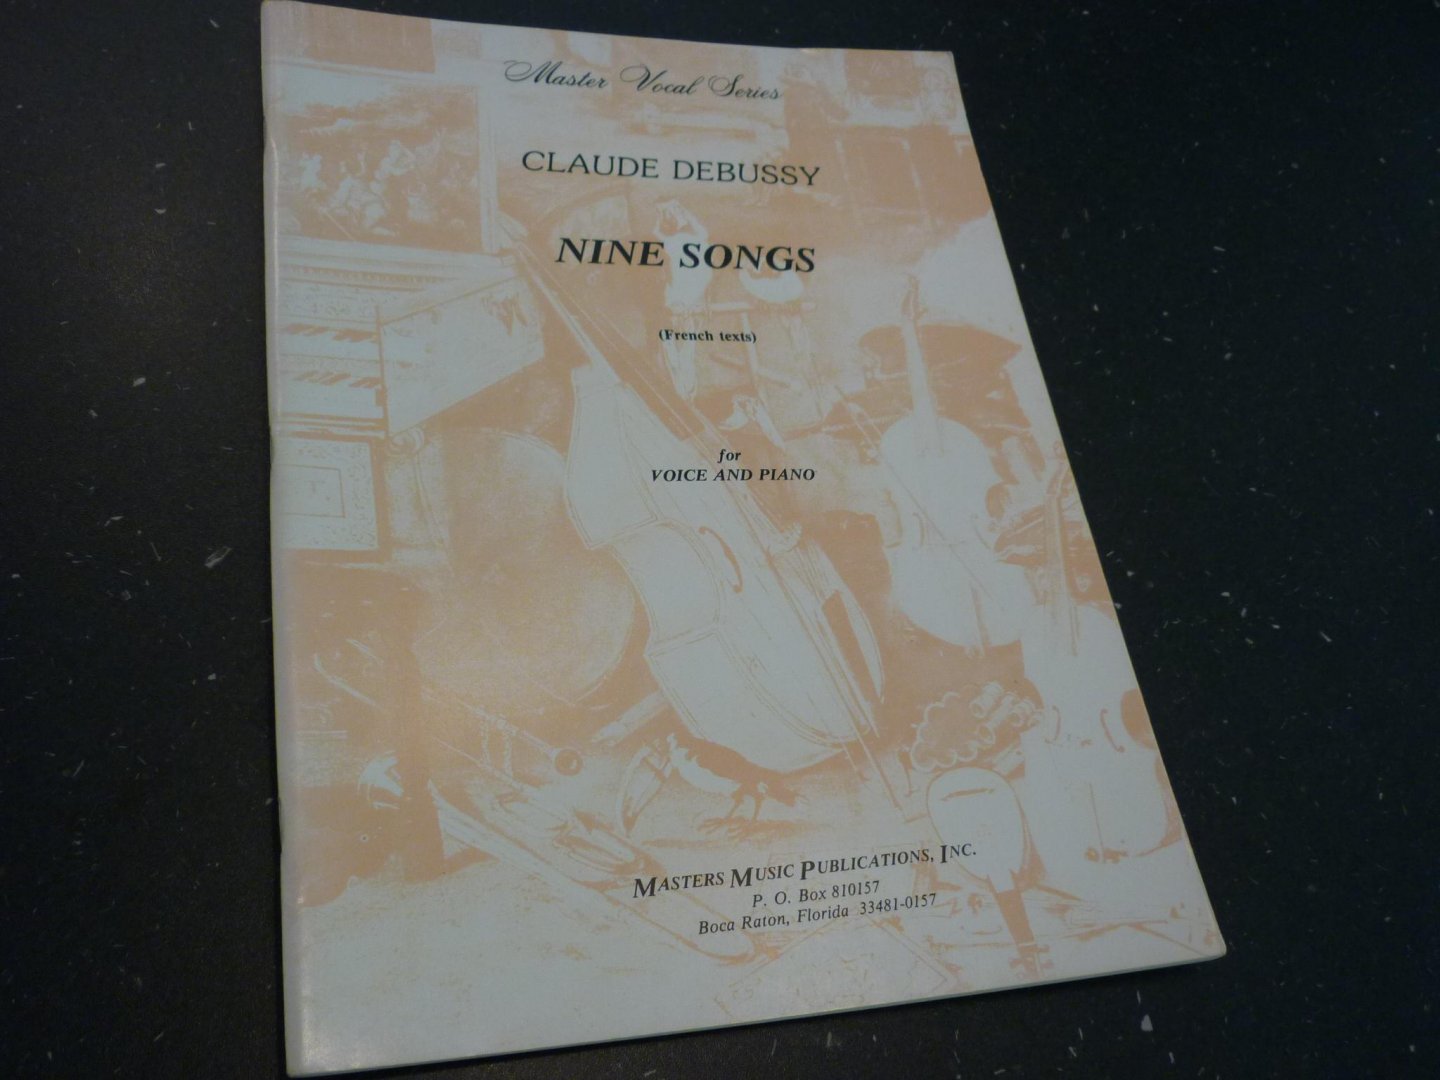 Debussy; Claude (1862-1918) - Nine songs; for voice and piano - French texts